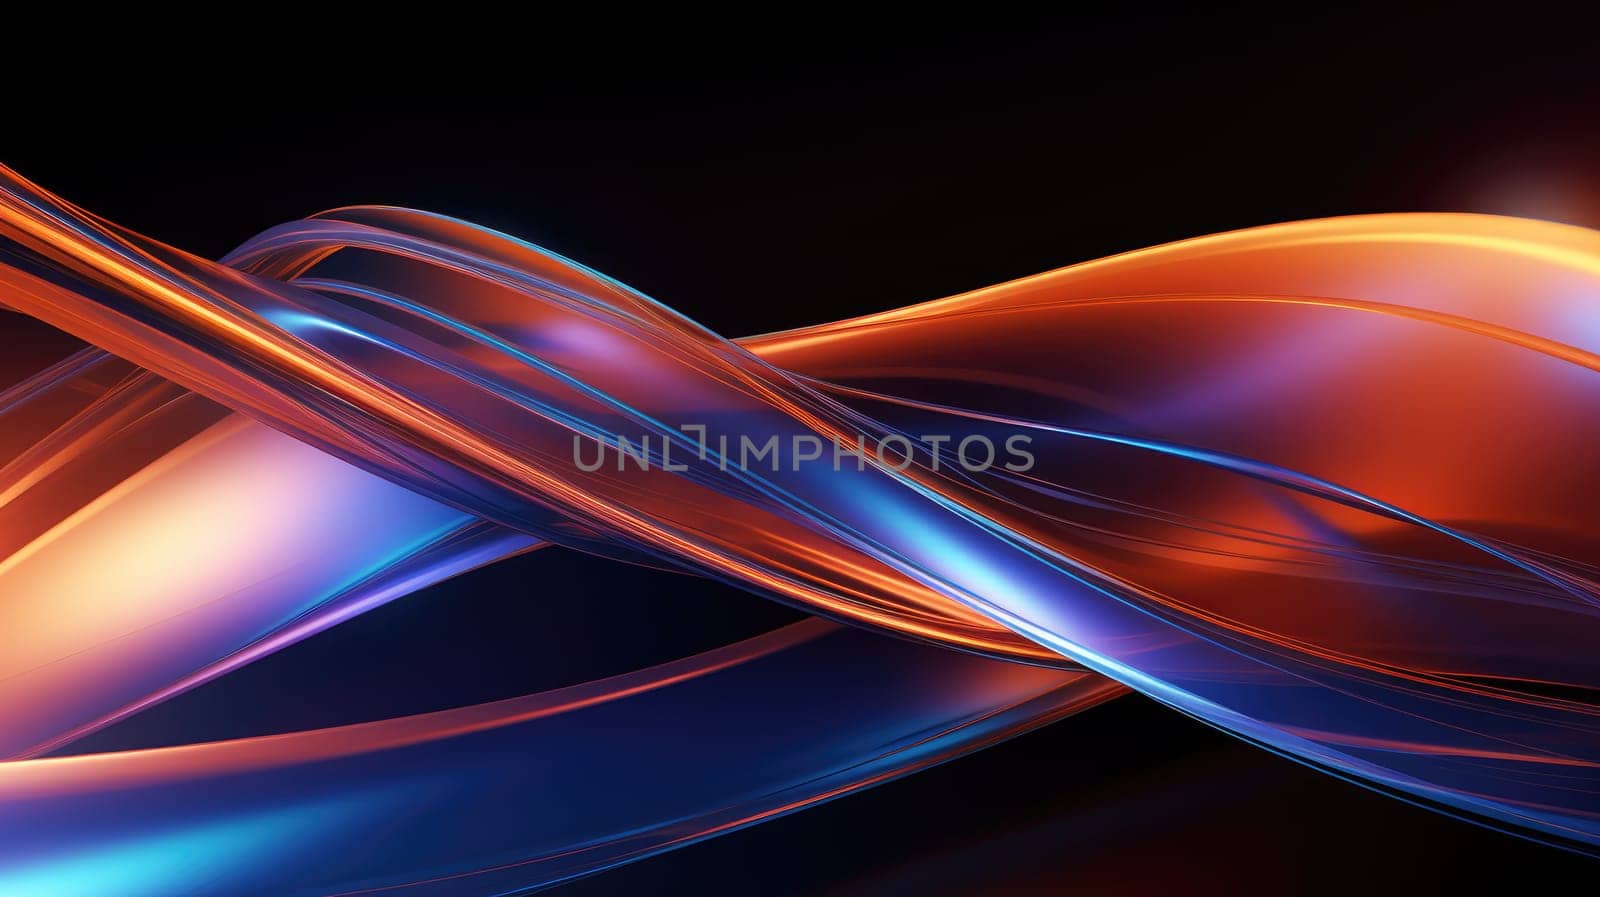 Abstract background of glowing lines in bright neon colours on a dark background